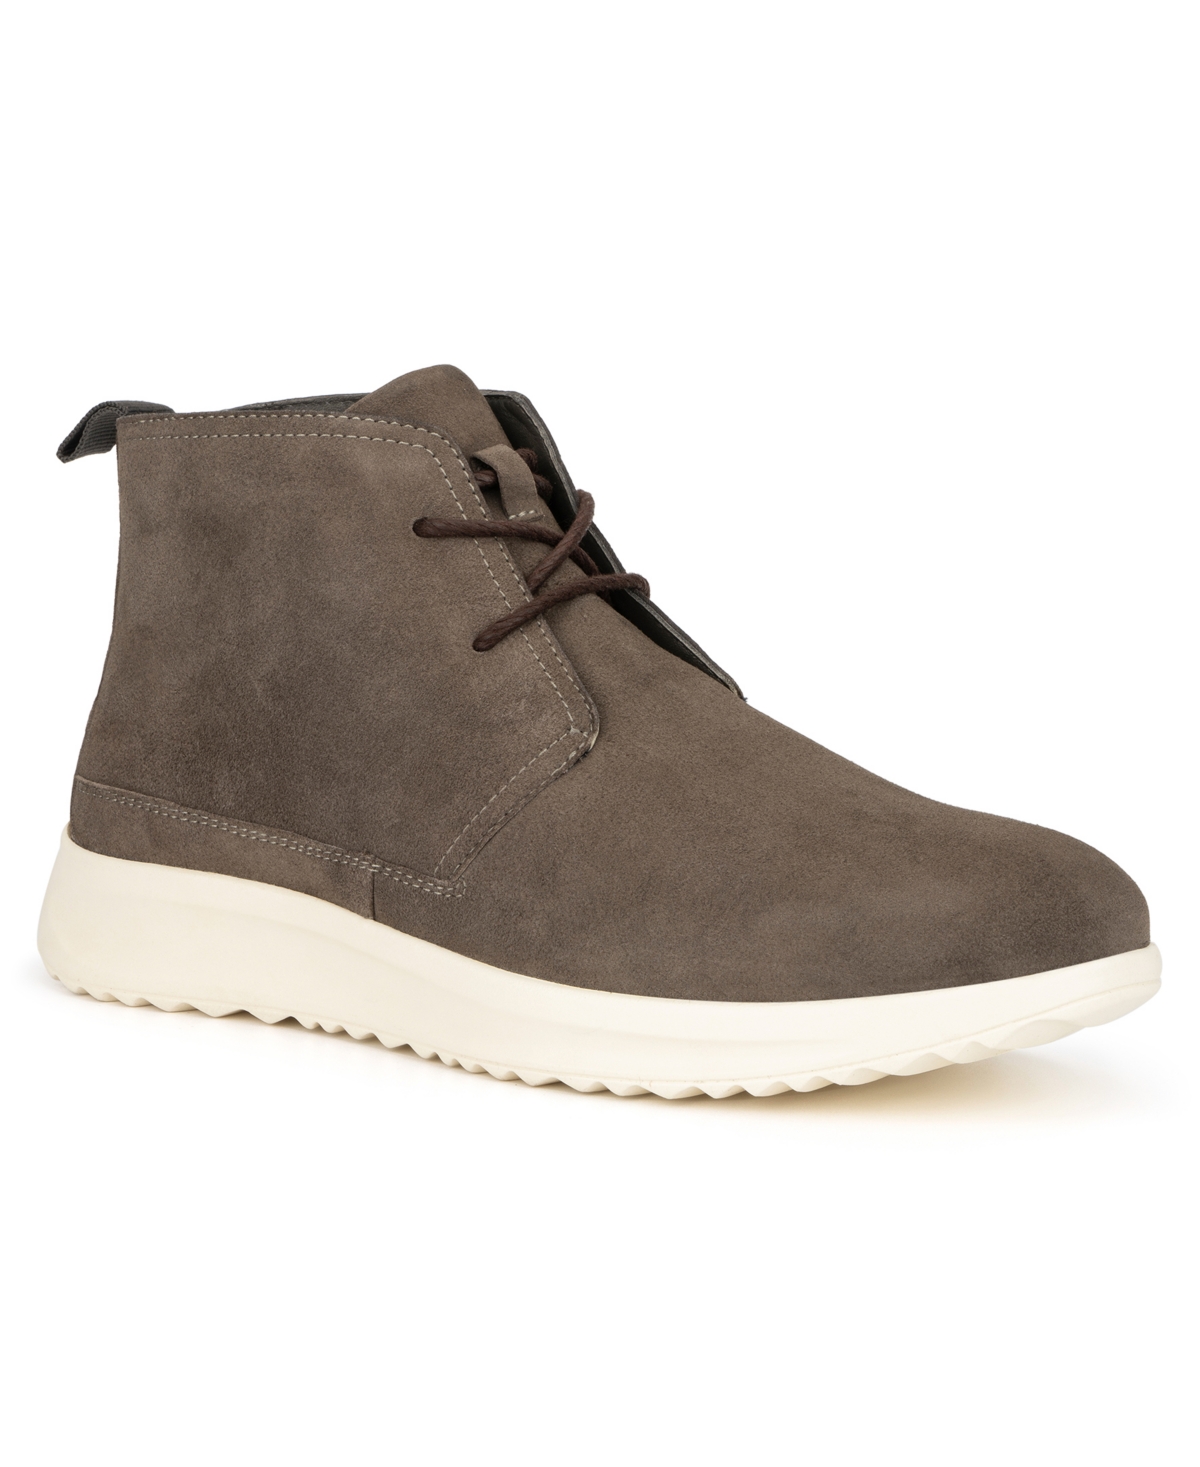 Men's Baryon Boots - Taupe